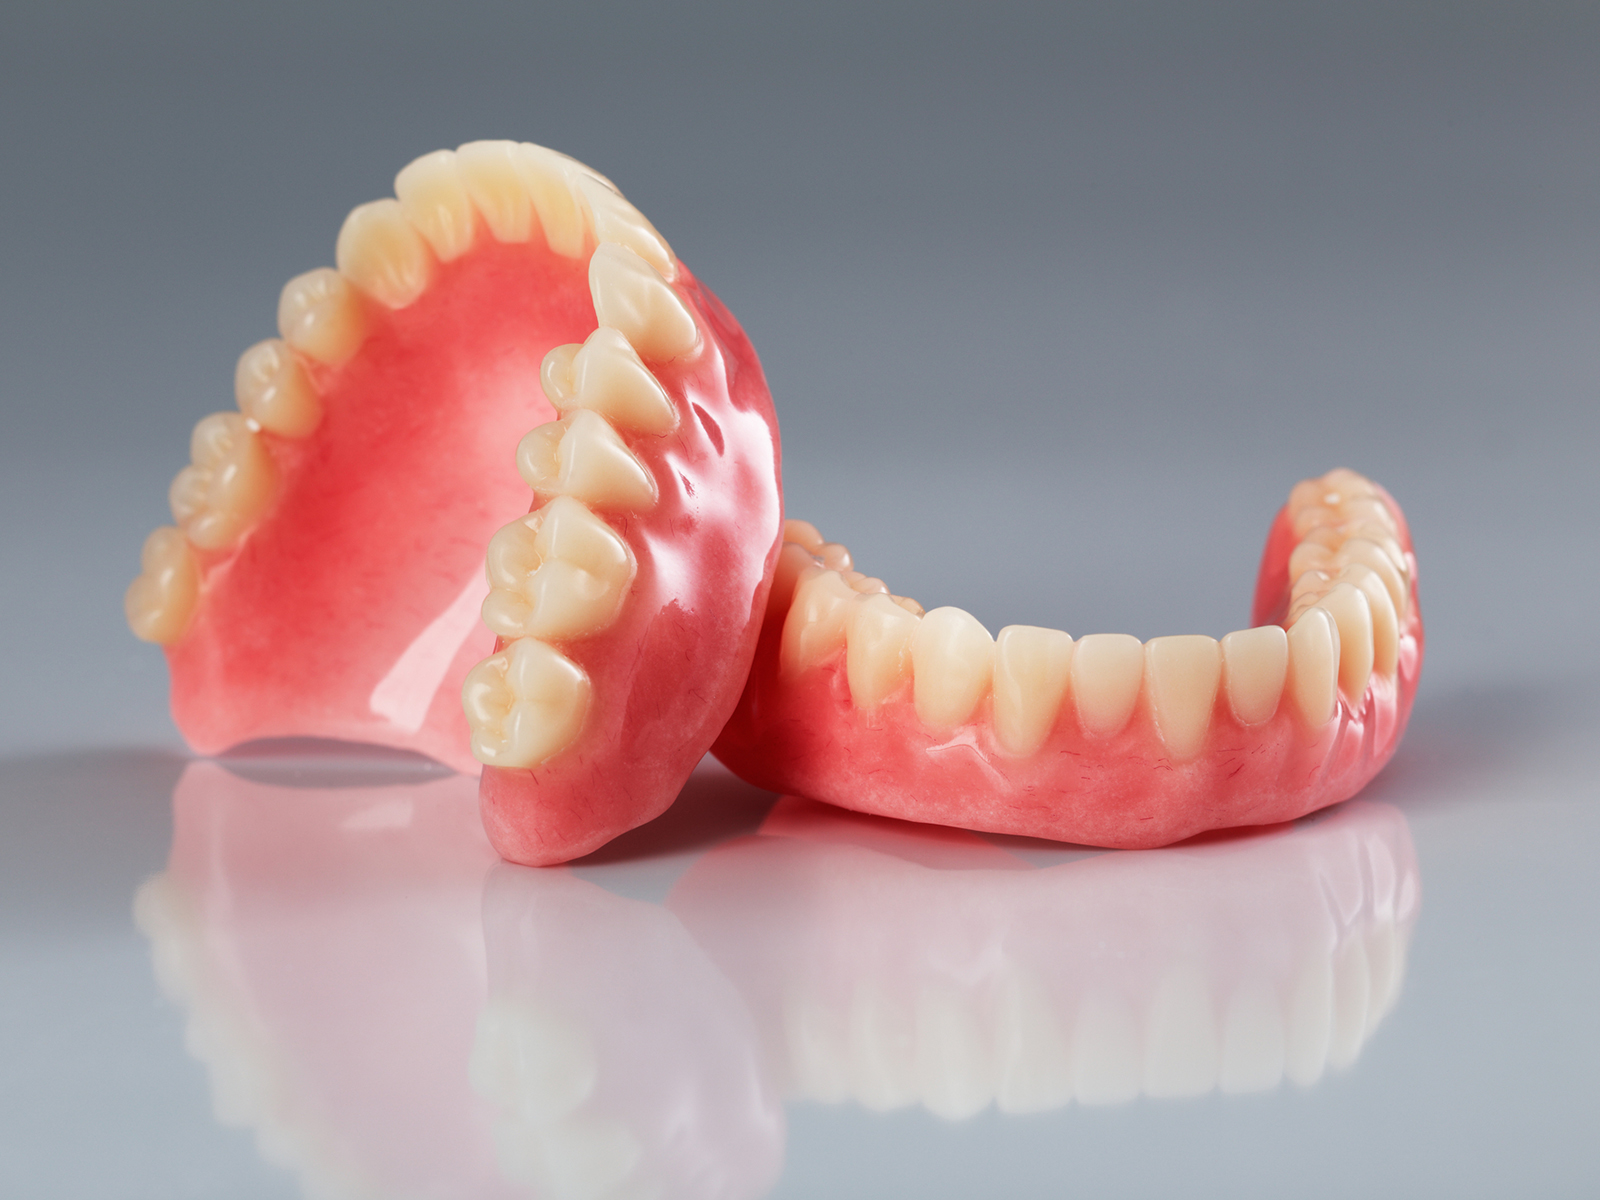 Are dentures a bad thing?